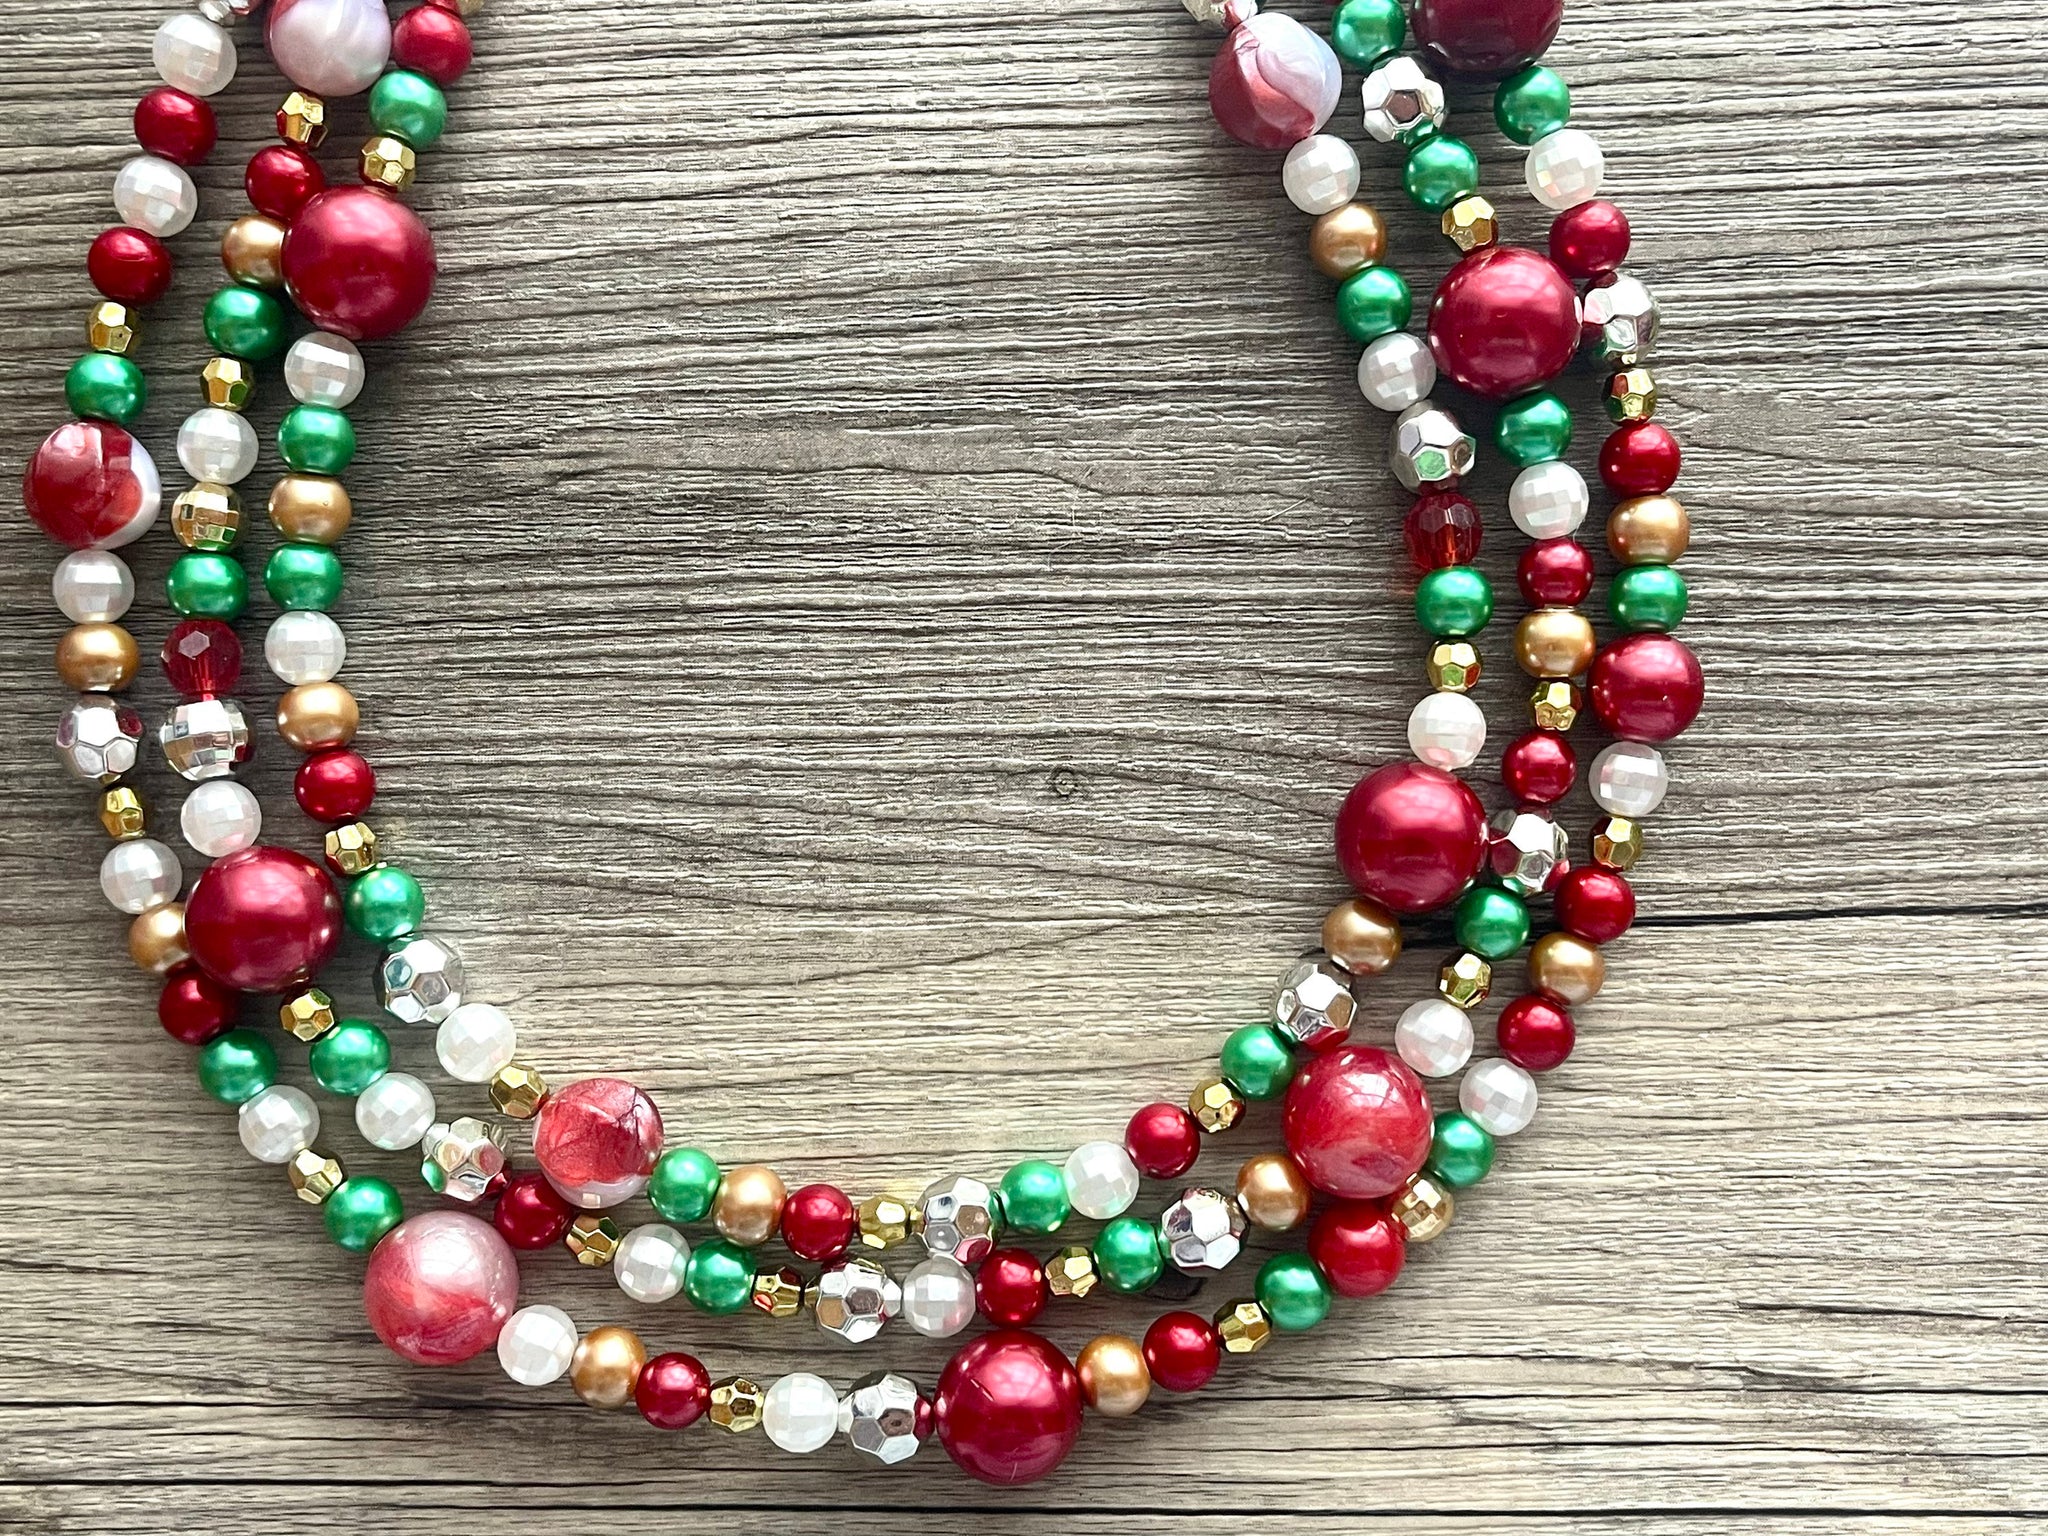  620PCS Christmas Beads for Jewelry Making, Red Green